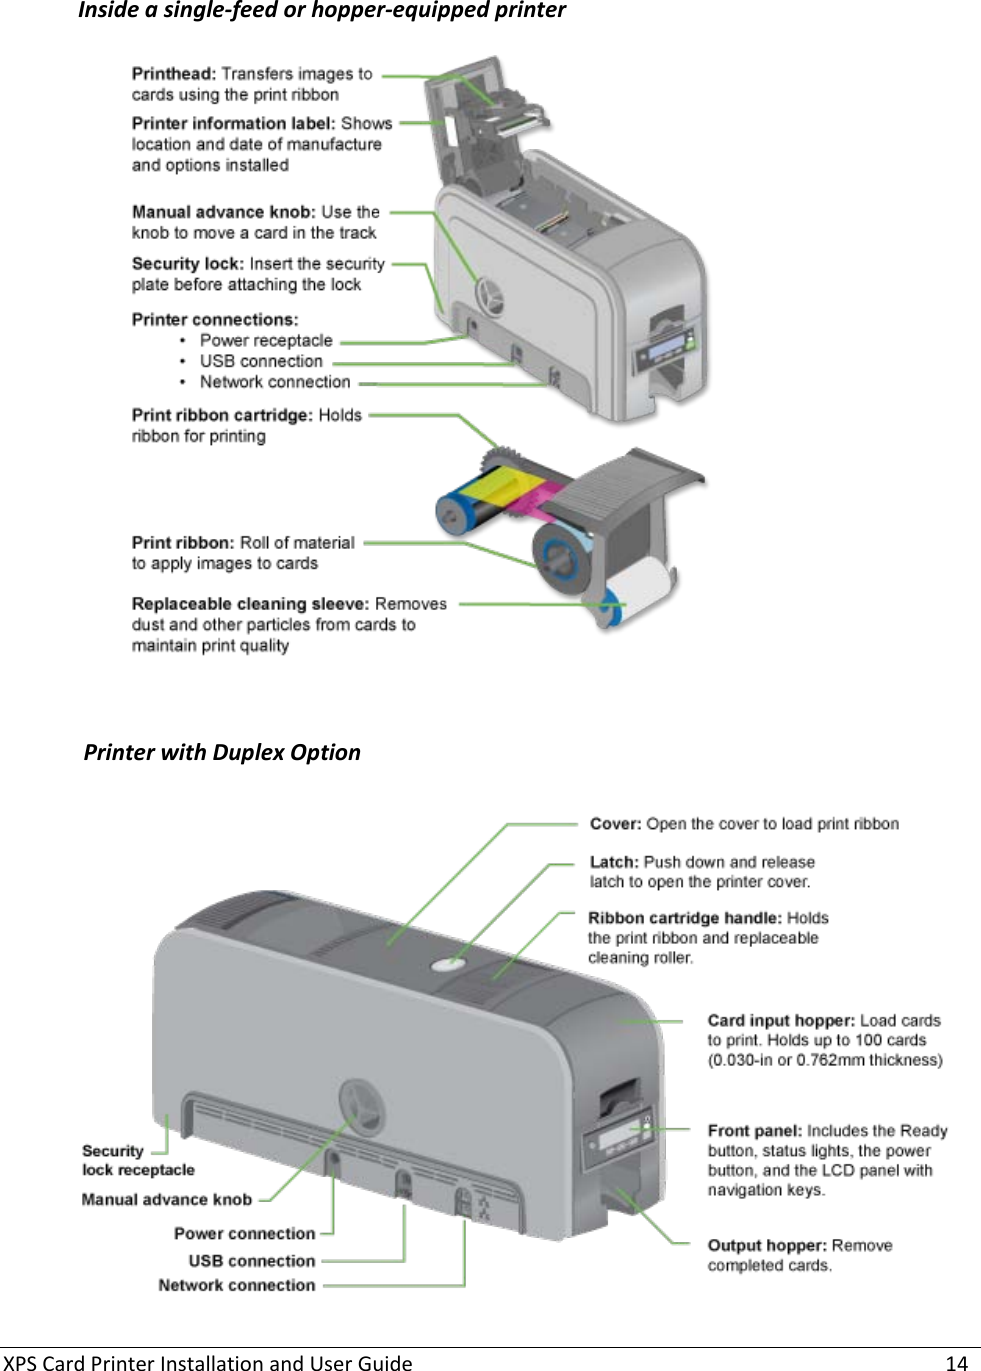 XPS Card Printer Installation and User Guide    14  Inside a single-feed or hopper-equipped printer    Printer with Duplex Option   